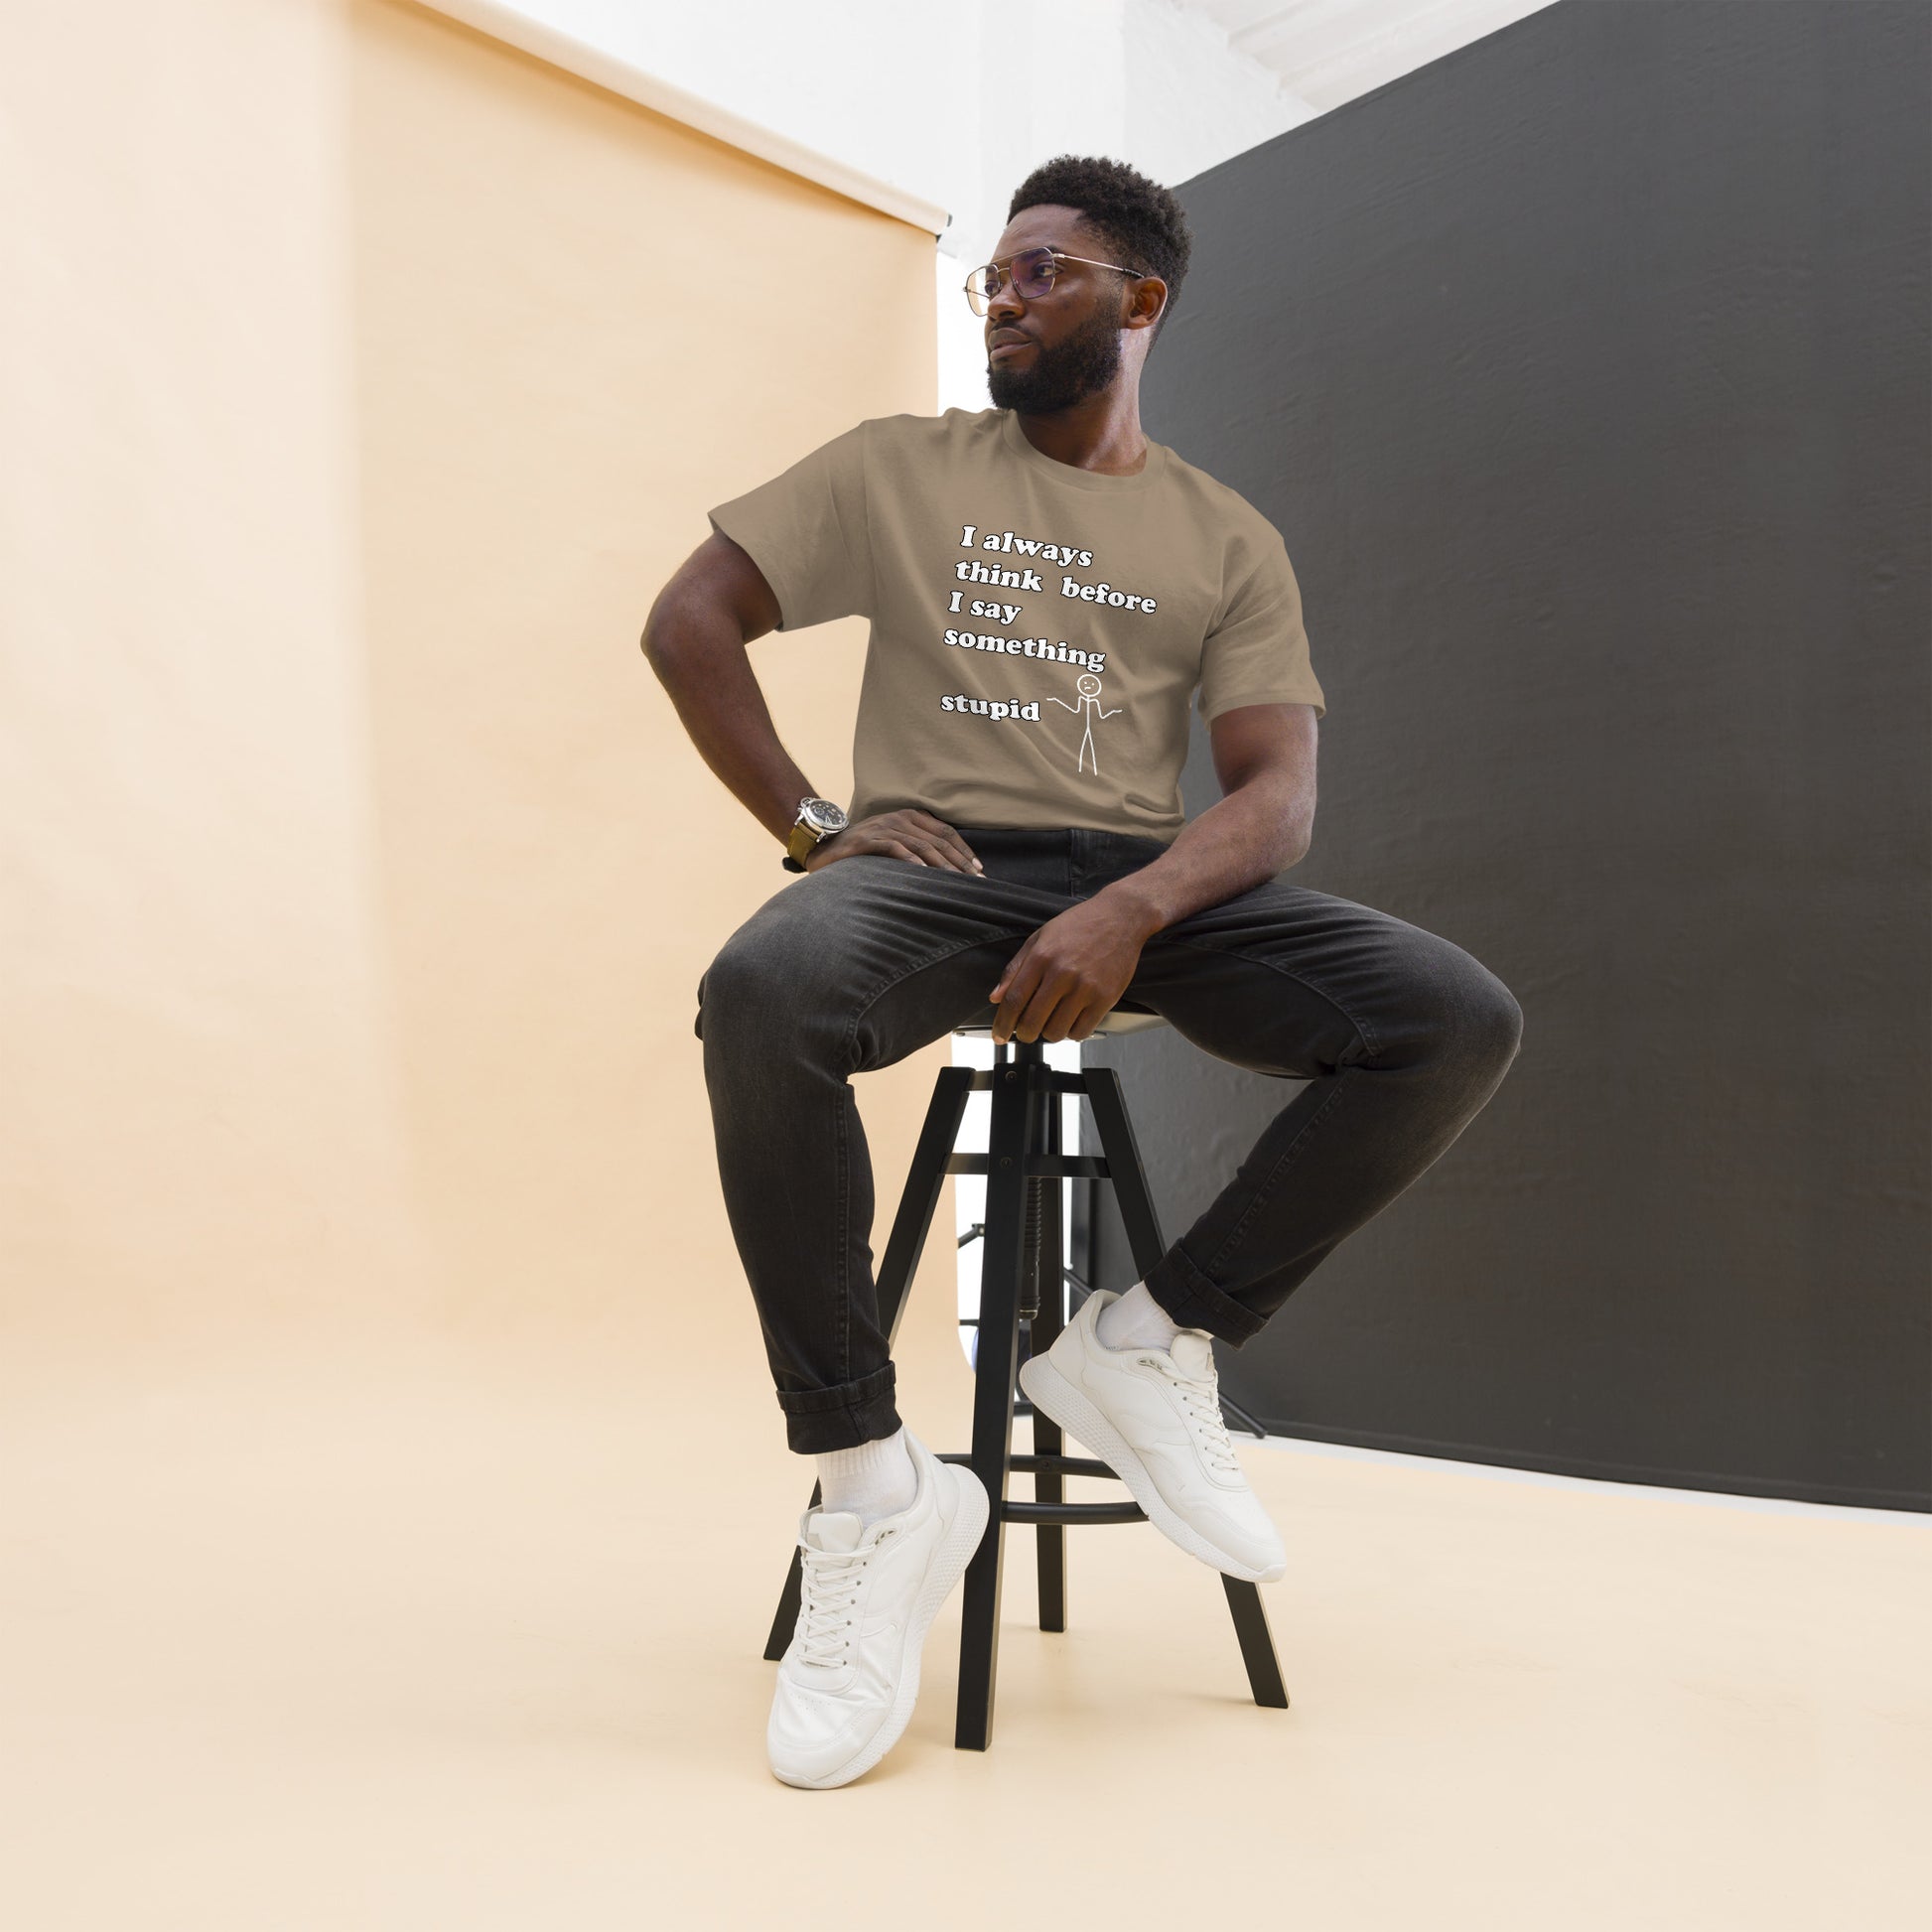 Man with brown t-shirt with text "I always think before I say something stupid"